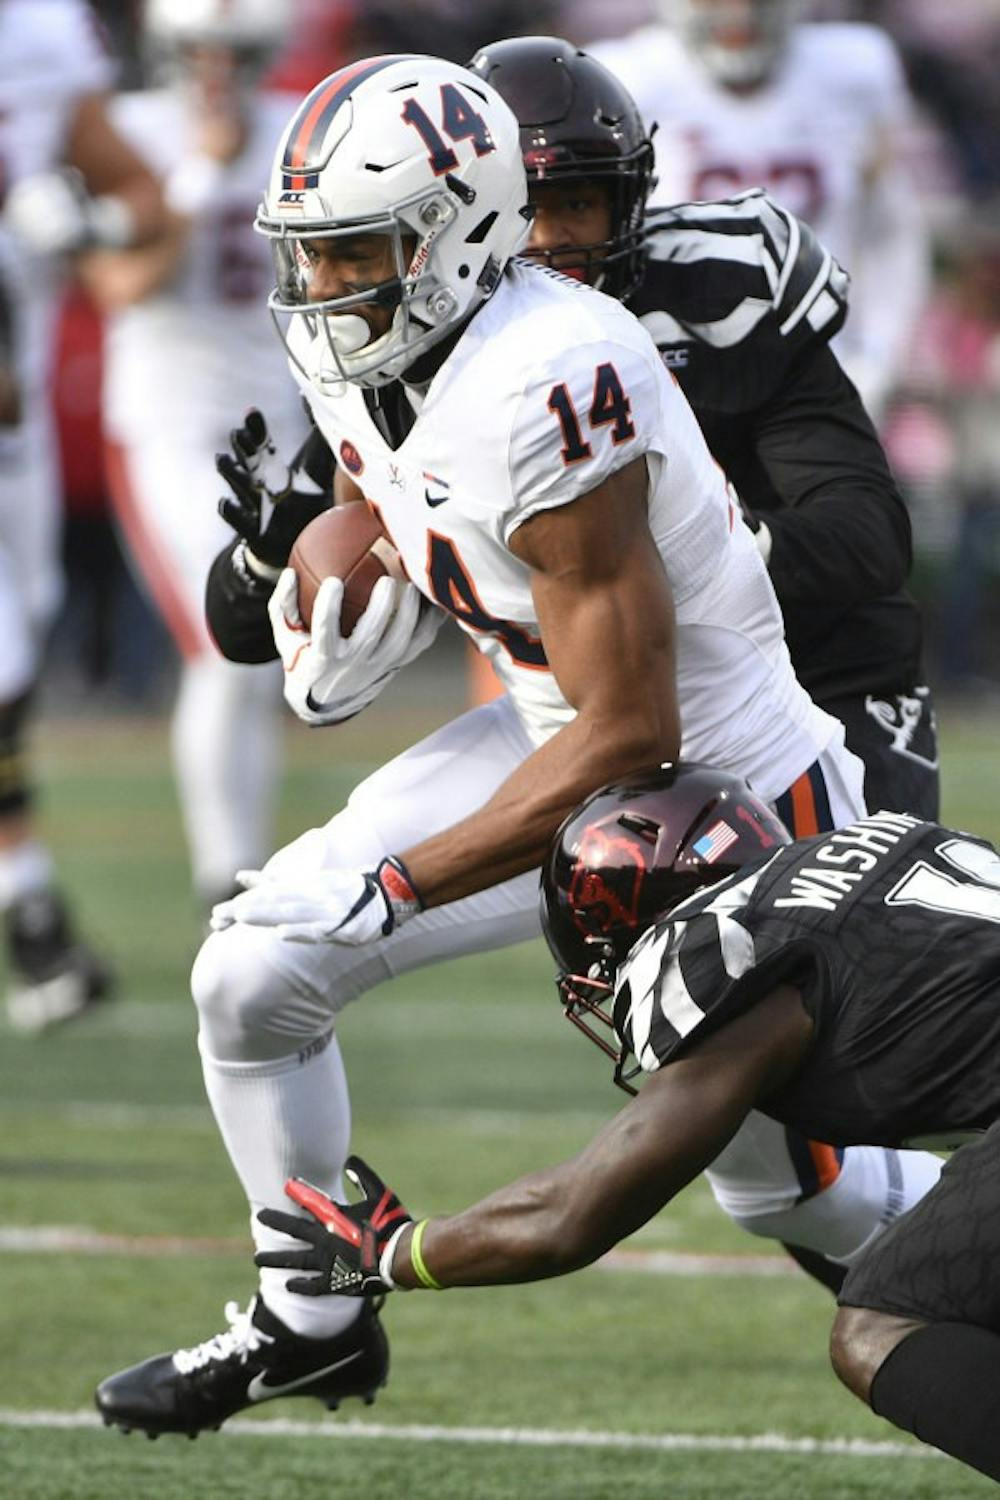 <p>Senior wide receiver Andre Levrone had a solid game with 92 receiving yards in the loss against Louisville.</p>